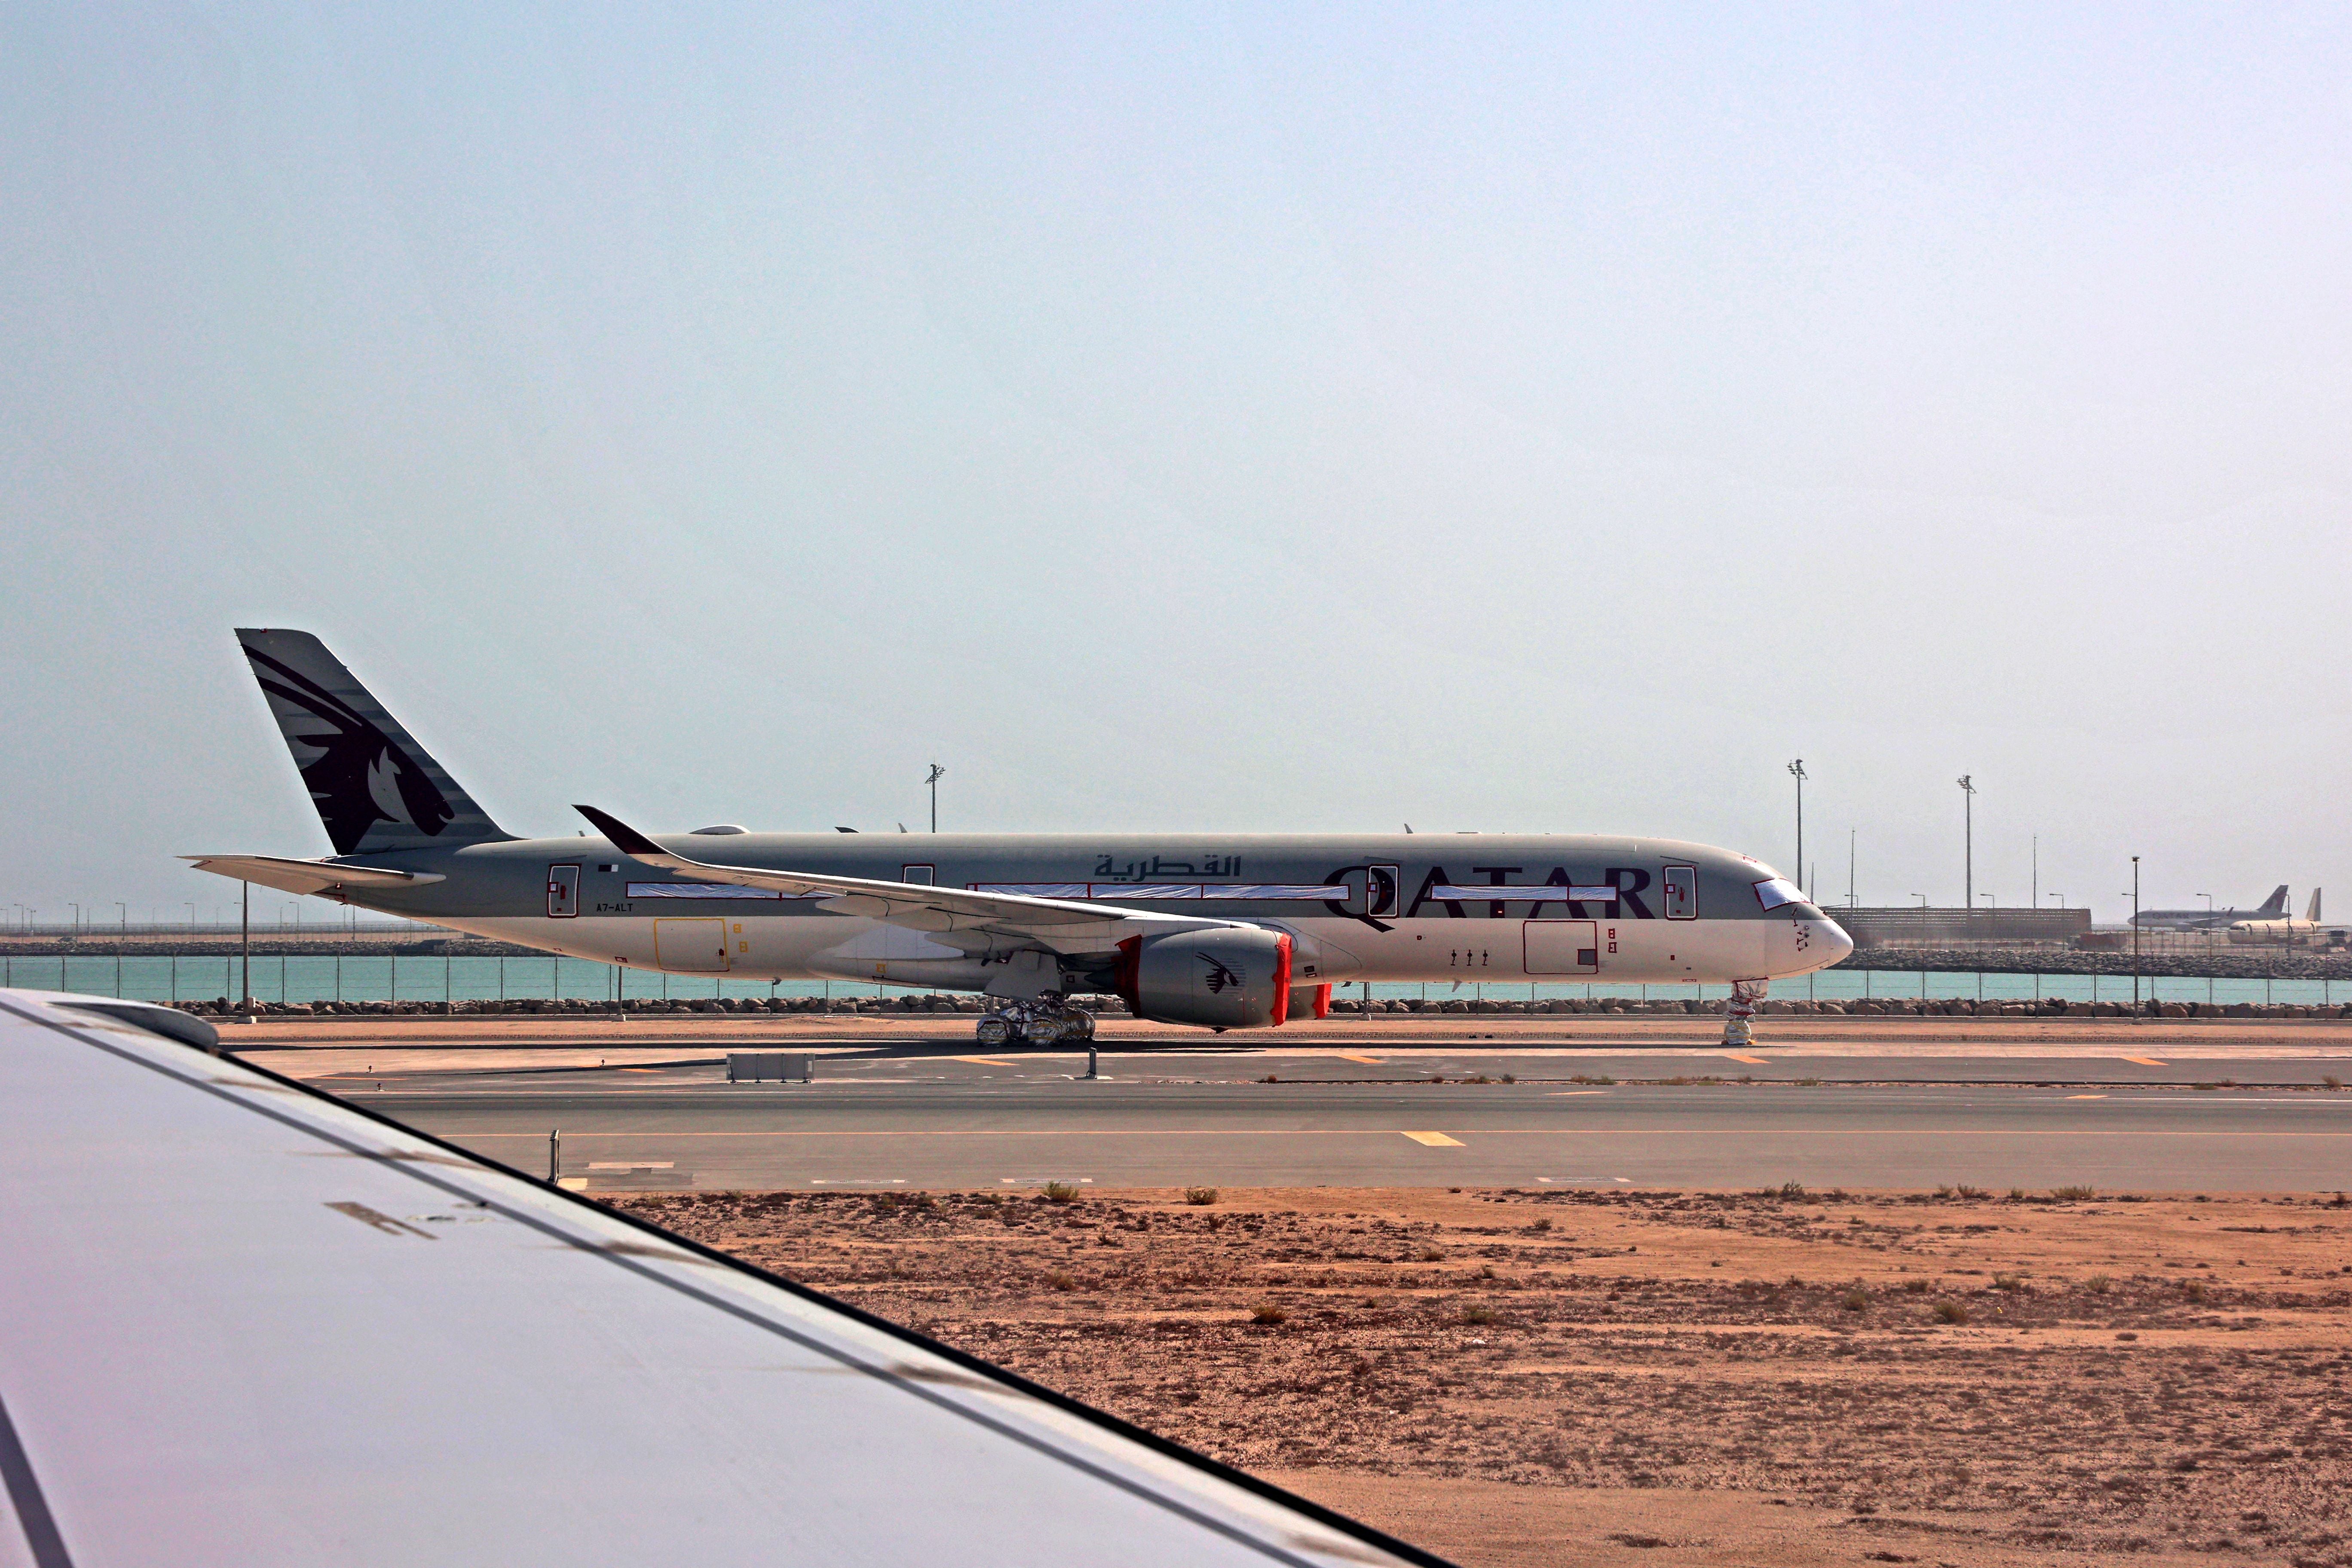 File: A Qatar Airways aircraft is seen on the tarmac at Hamad International Airport in Doha